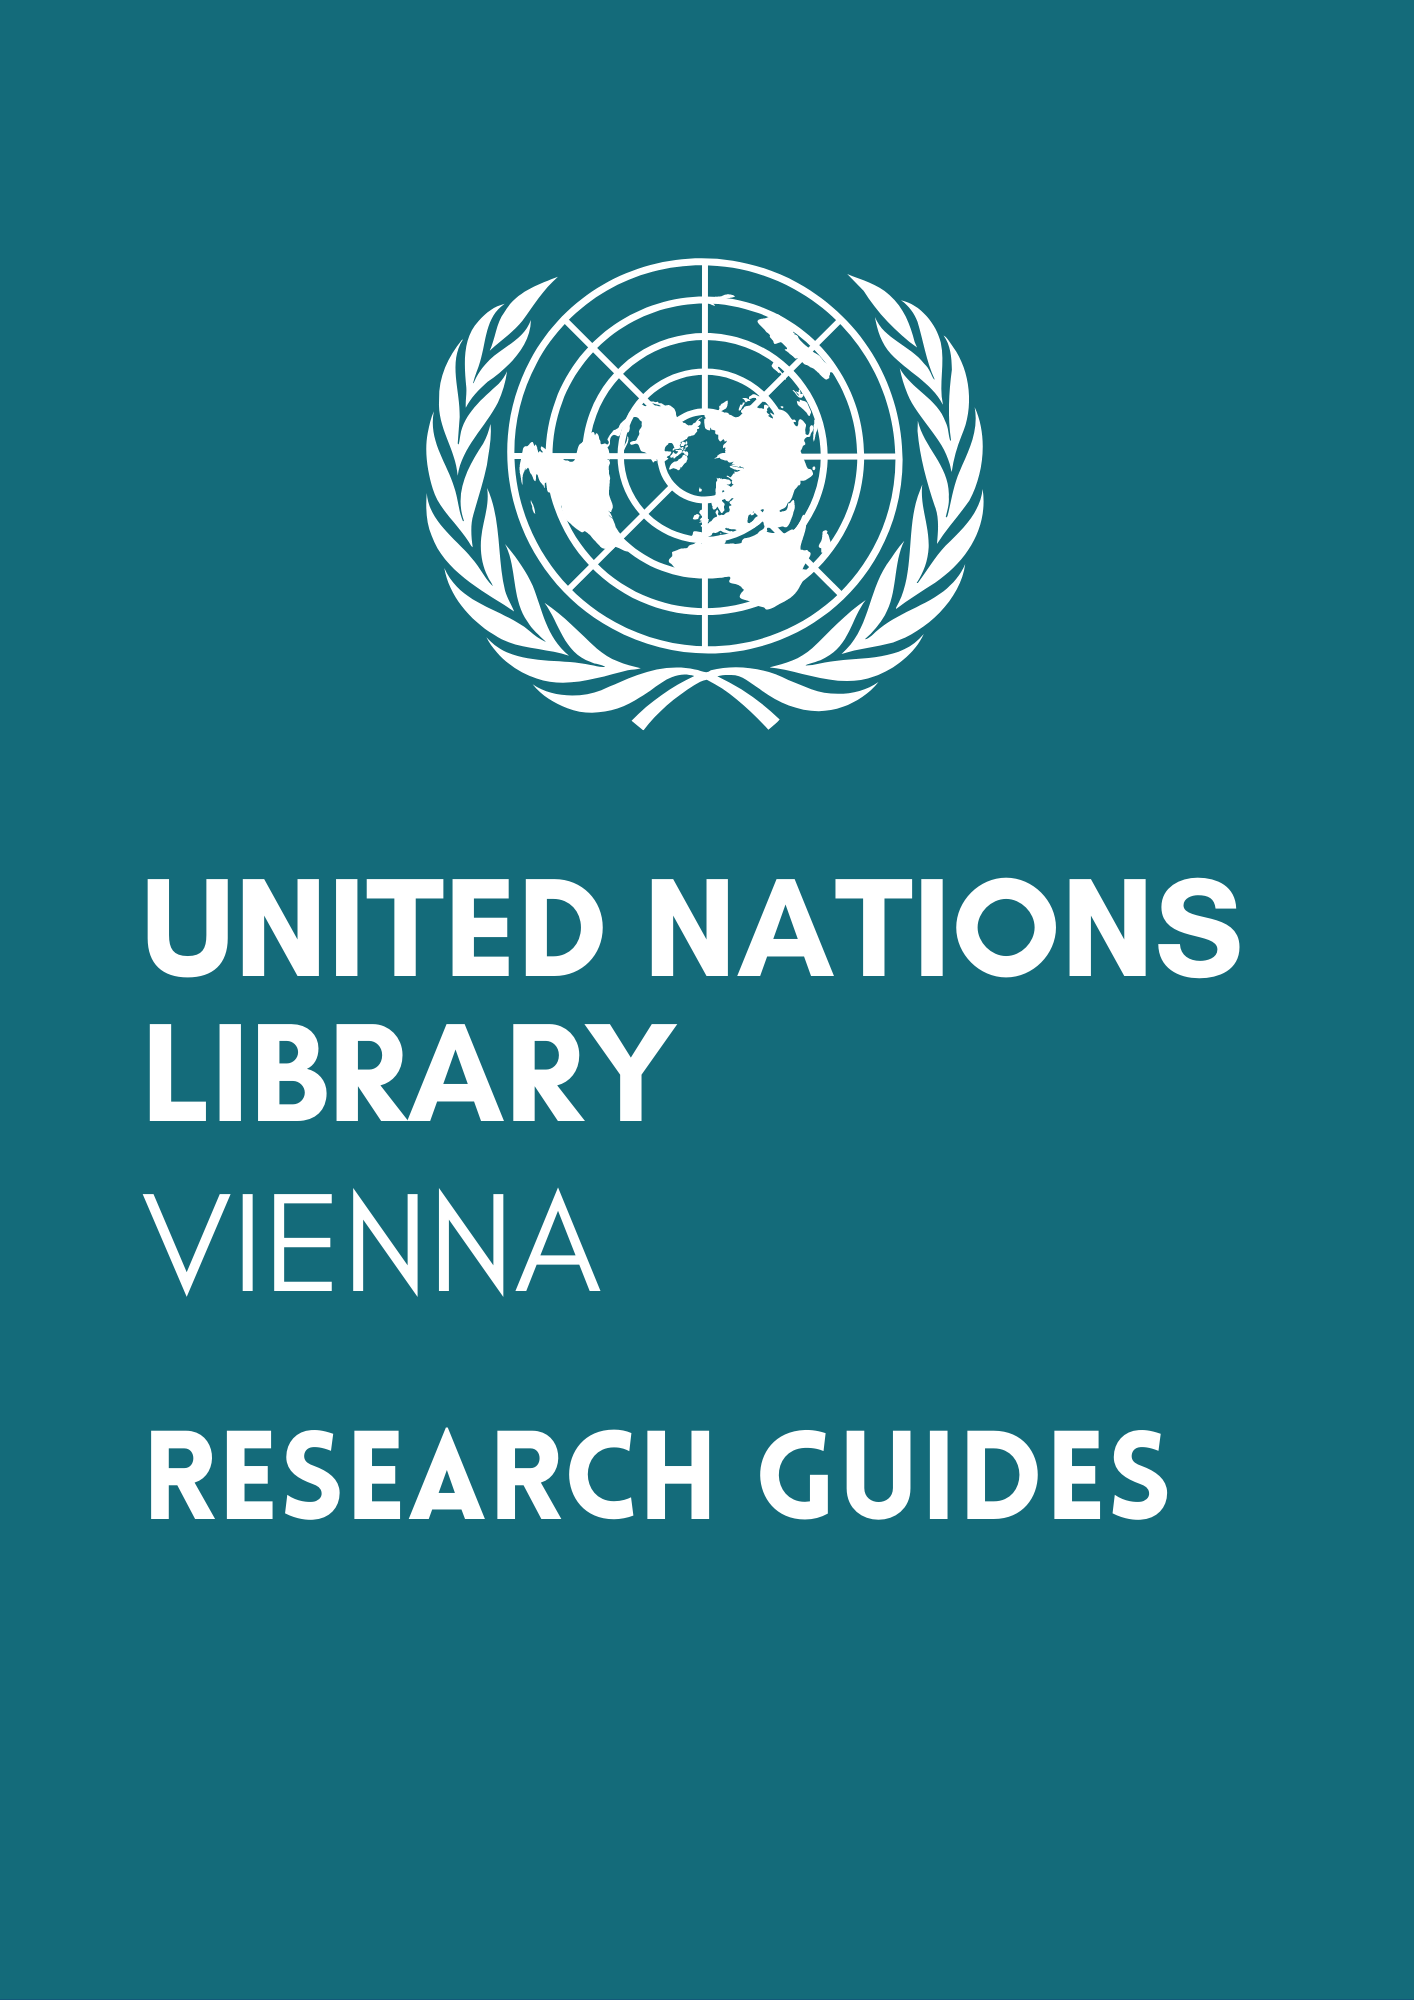 <p style="text-align: center;"><a href="https://libraryresearch.unvienna.org/organizedcrime">Research Guides by the United Nations Library - Vienna</a></p>